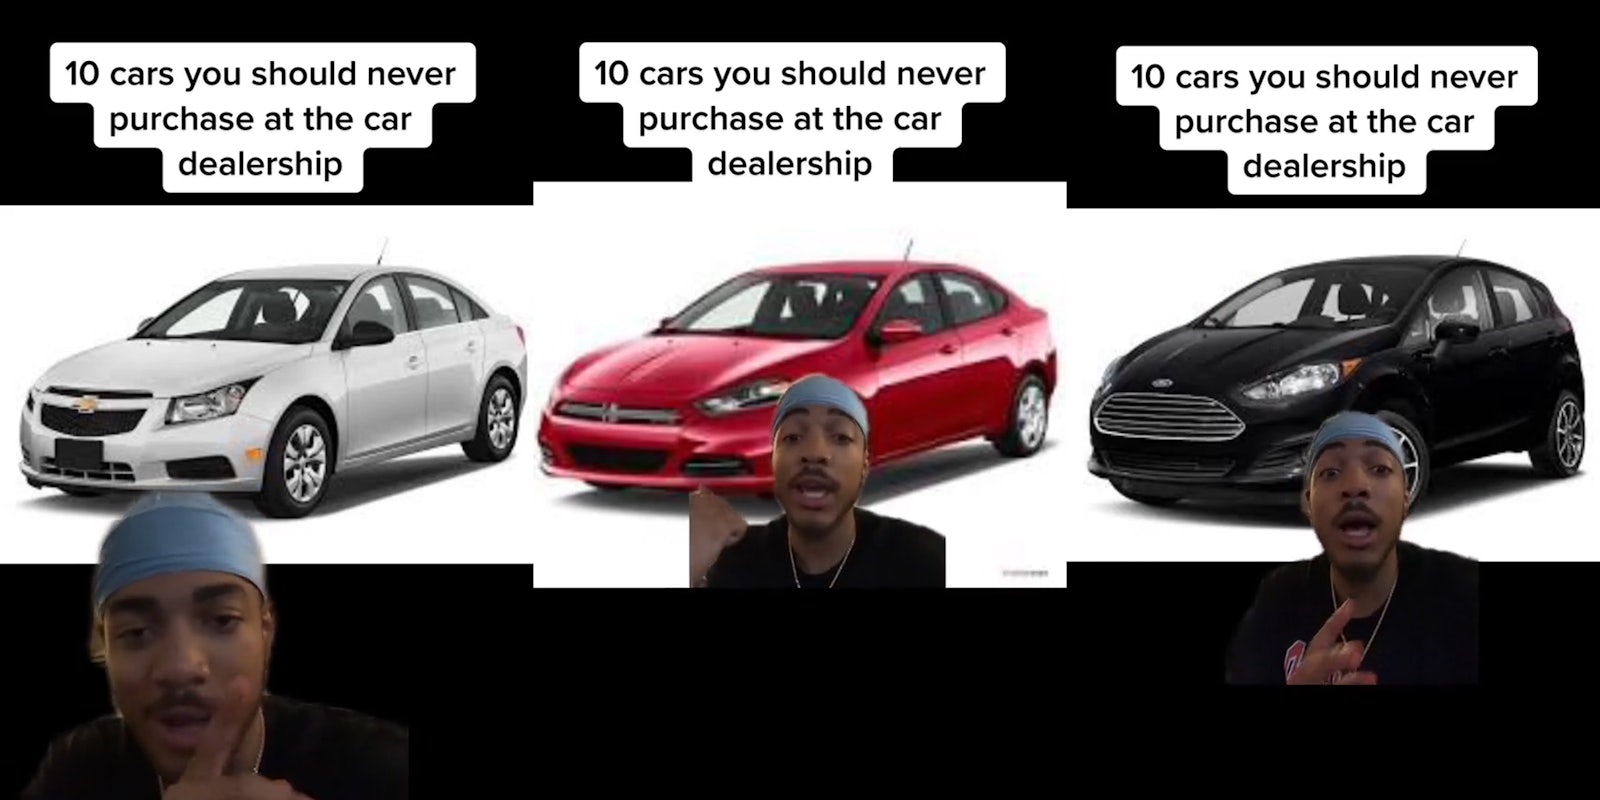 car seller greenscreen TikTok over image of Chevy Cruise with caption '10 cars you should never purchase at the car dealership' (l) car seller greenscreen TikTok over image of Dodge Dart with caption '10 cars you should never purchase at the car dealership' (c) car seller greenscreen TikTok over image of Ford Fiesta with caption '10 cars you should never purchase at the car dealership' (r)